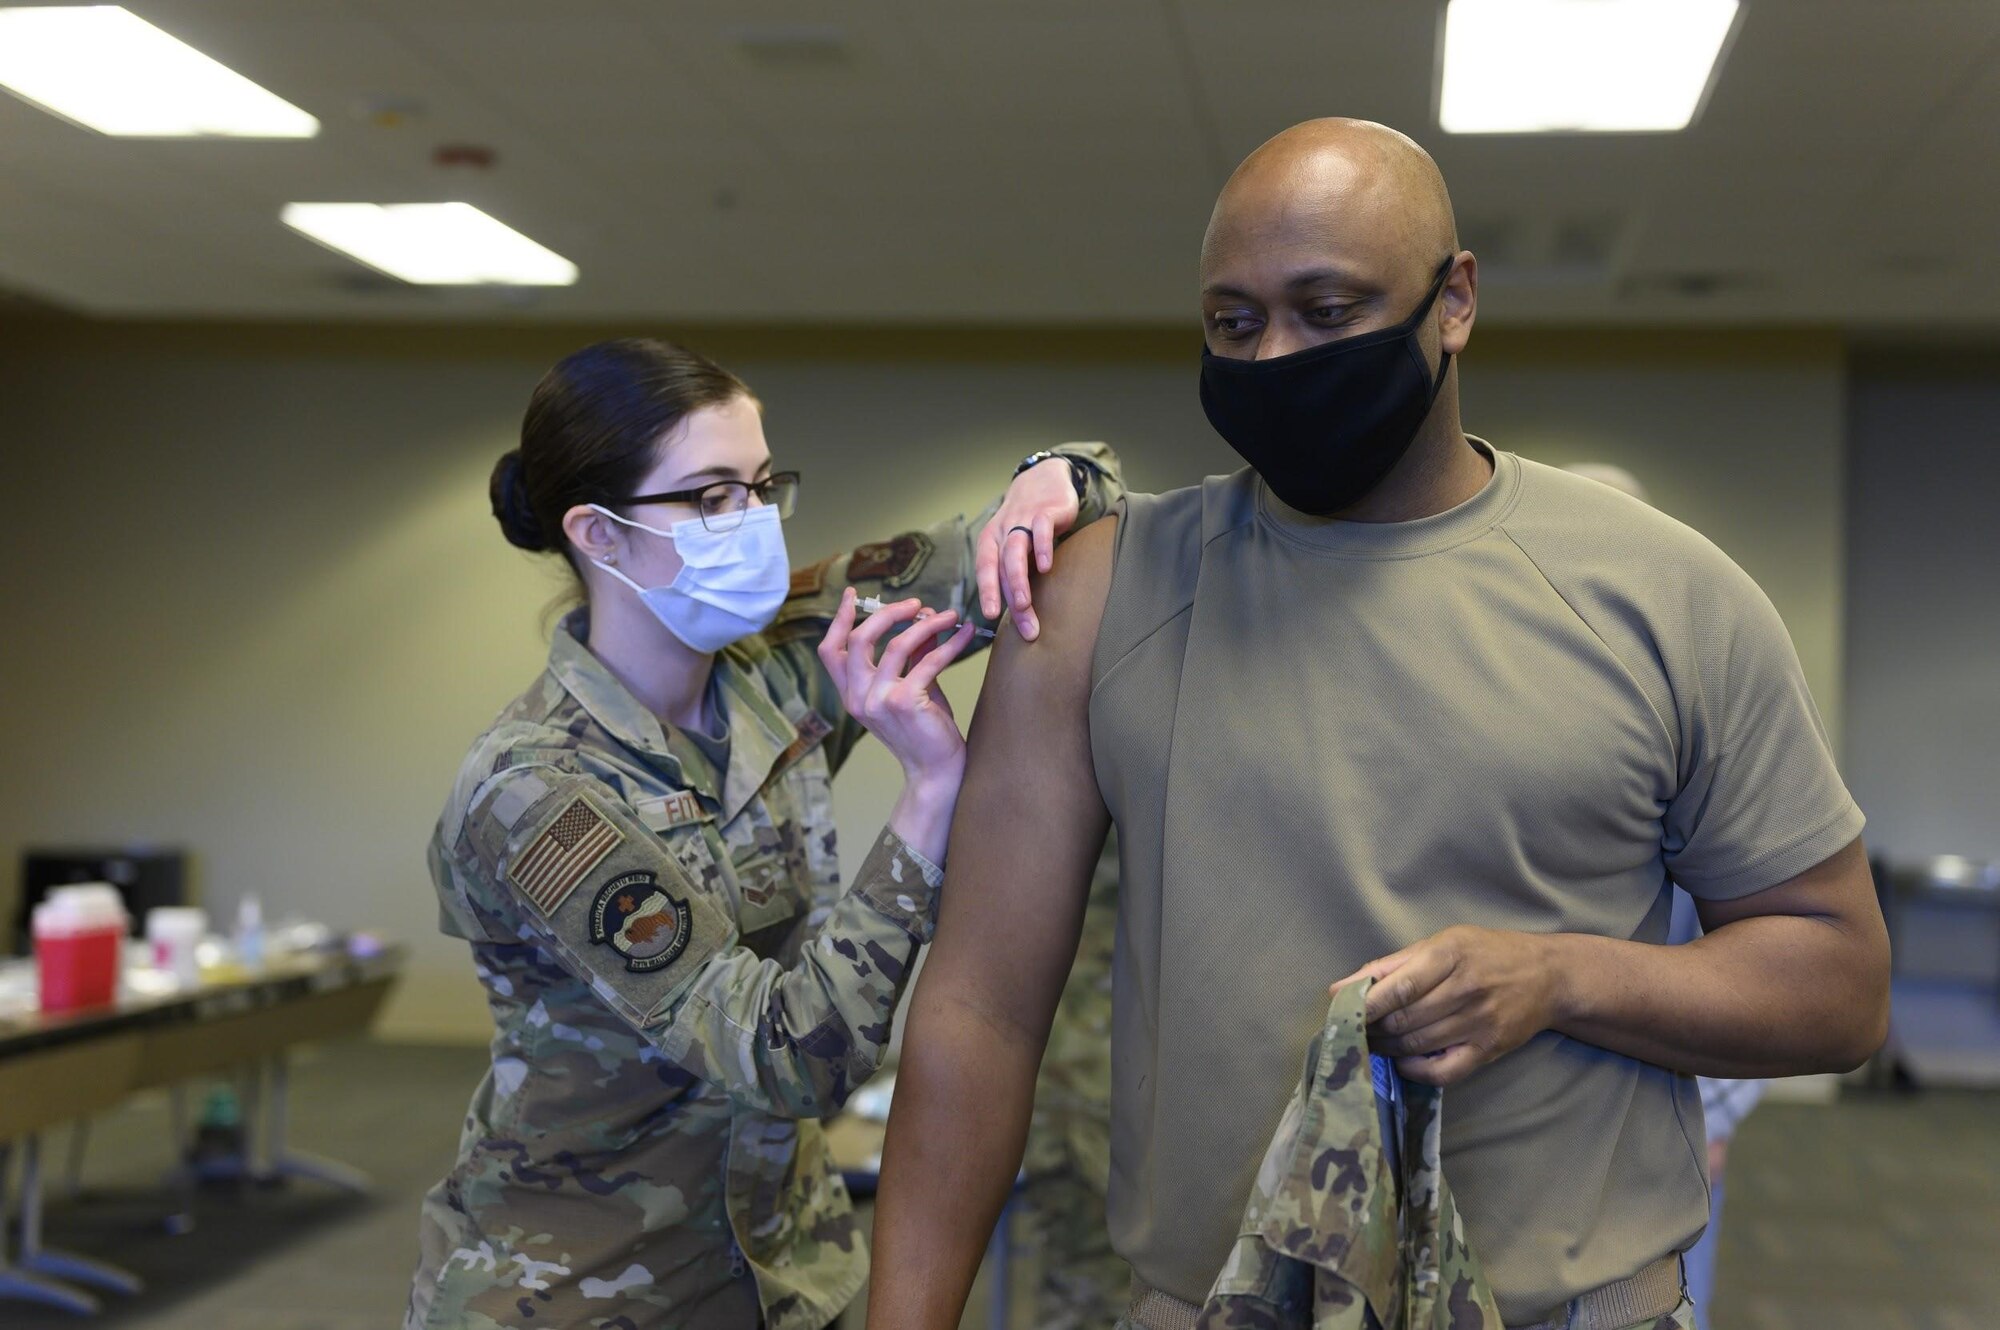 Senior Airman Brittney Fitschen, 28th Health Care Operations Squadron family health technician, administers a COVID-19 vaccine to Lt. Col. David Herndon, 28th Security Forces Squadron commander, at Ellsworth Air Force Base, S.D., Jan. 15, 2021.